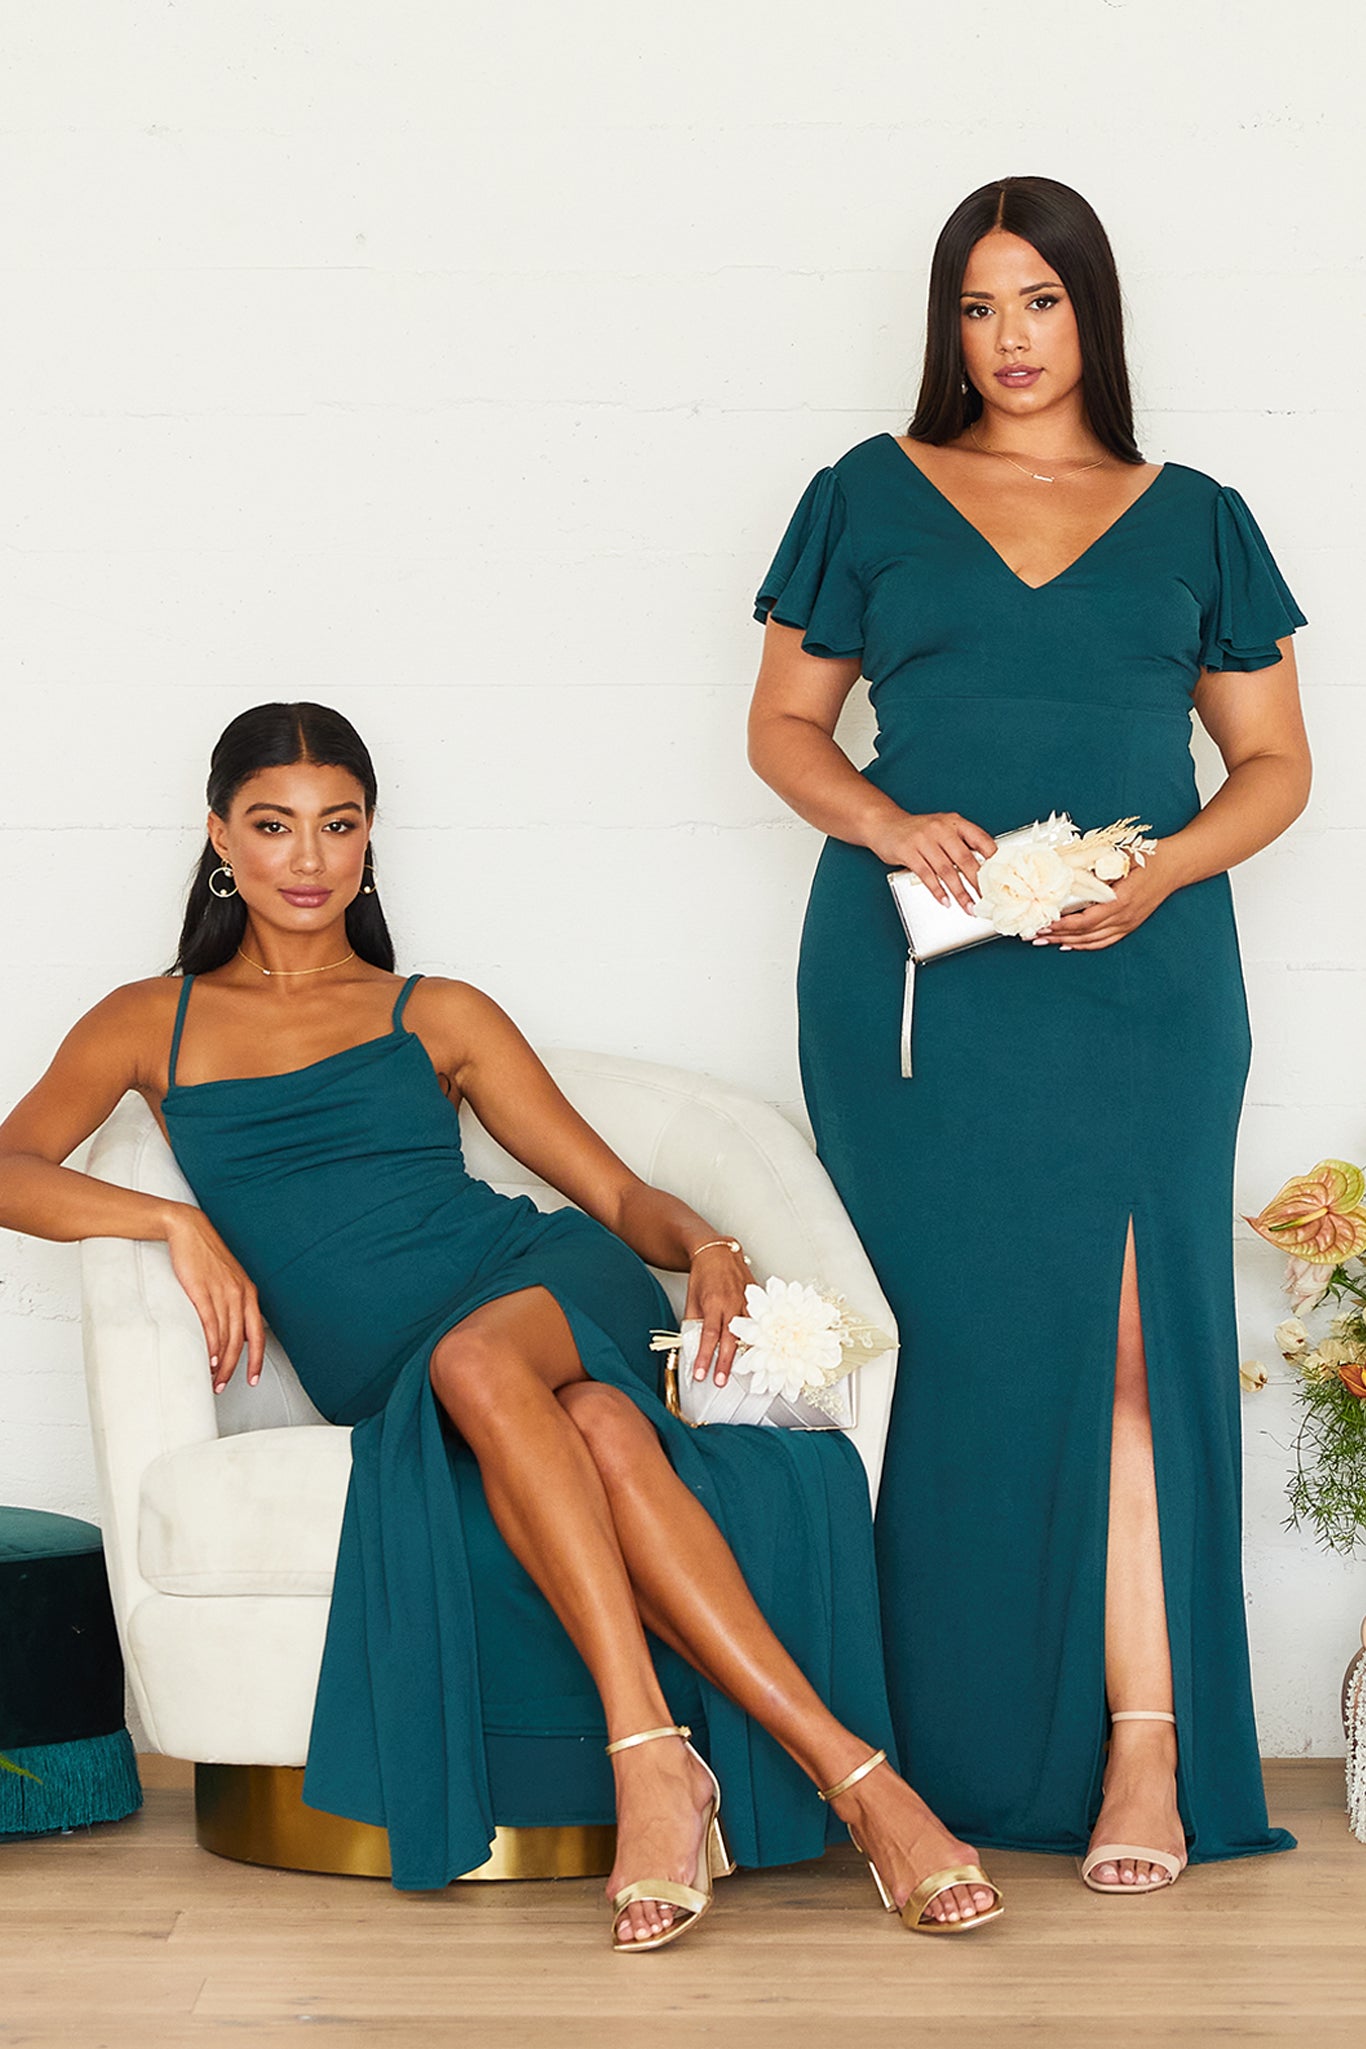 Two models pose in Birdy Grey emerald bridesmaid dresses. On the left, a slender model with a medium skin tone lounges in a white chair wearing the Ash Bridesmaid Dress. On the right, a curvy model with a medium skin tone stands next to the chair, wearing the floor-length Hannah Empire Curve Dress with Flutter Sleeves.